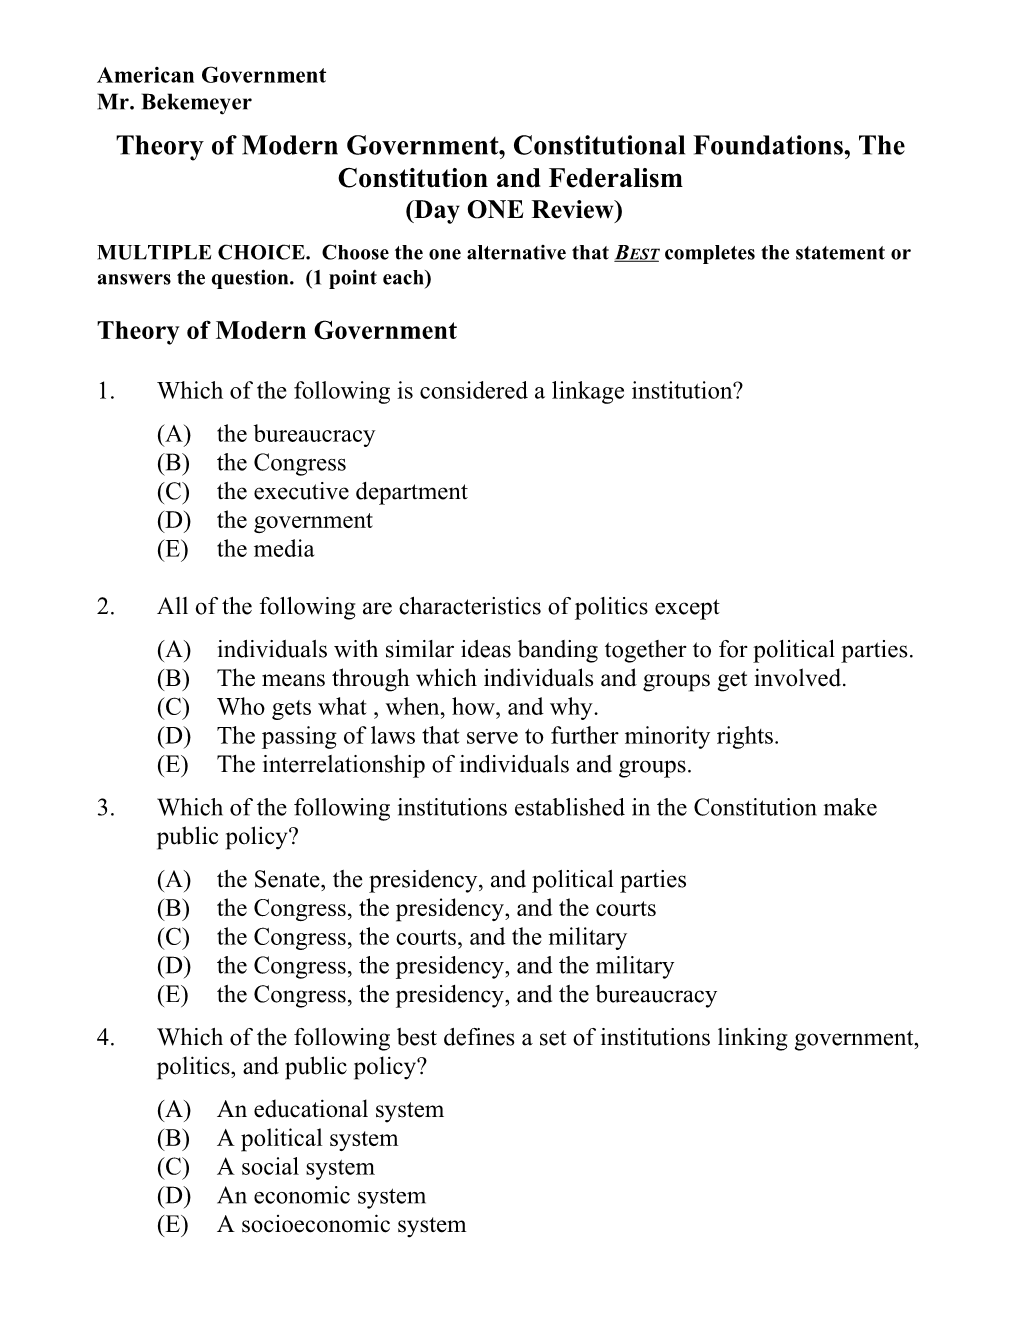 Theory of Modern Government, Constitutional Foundations, the Constitution and Federalism